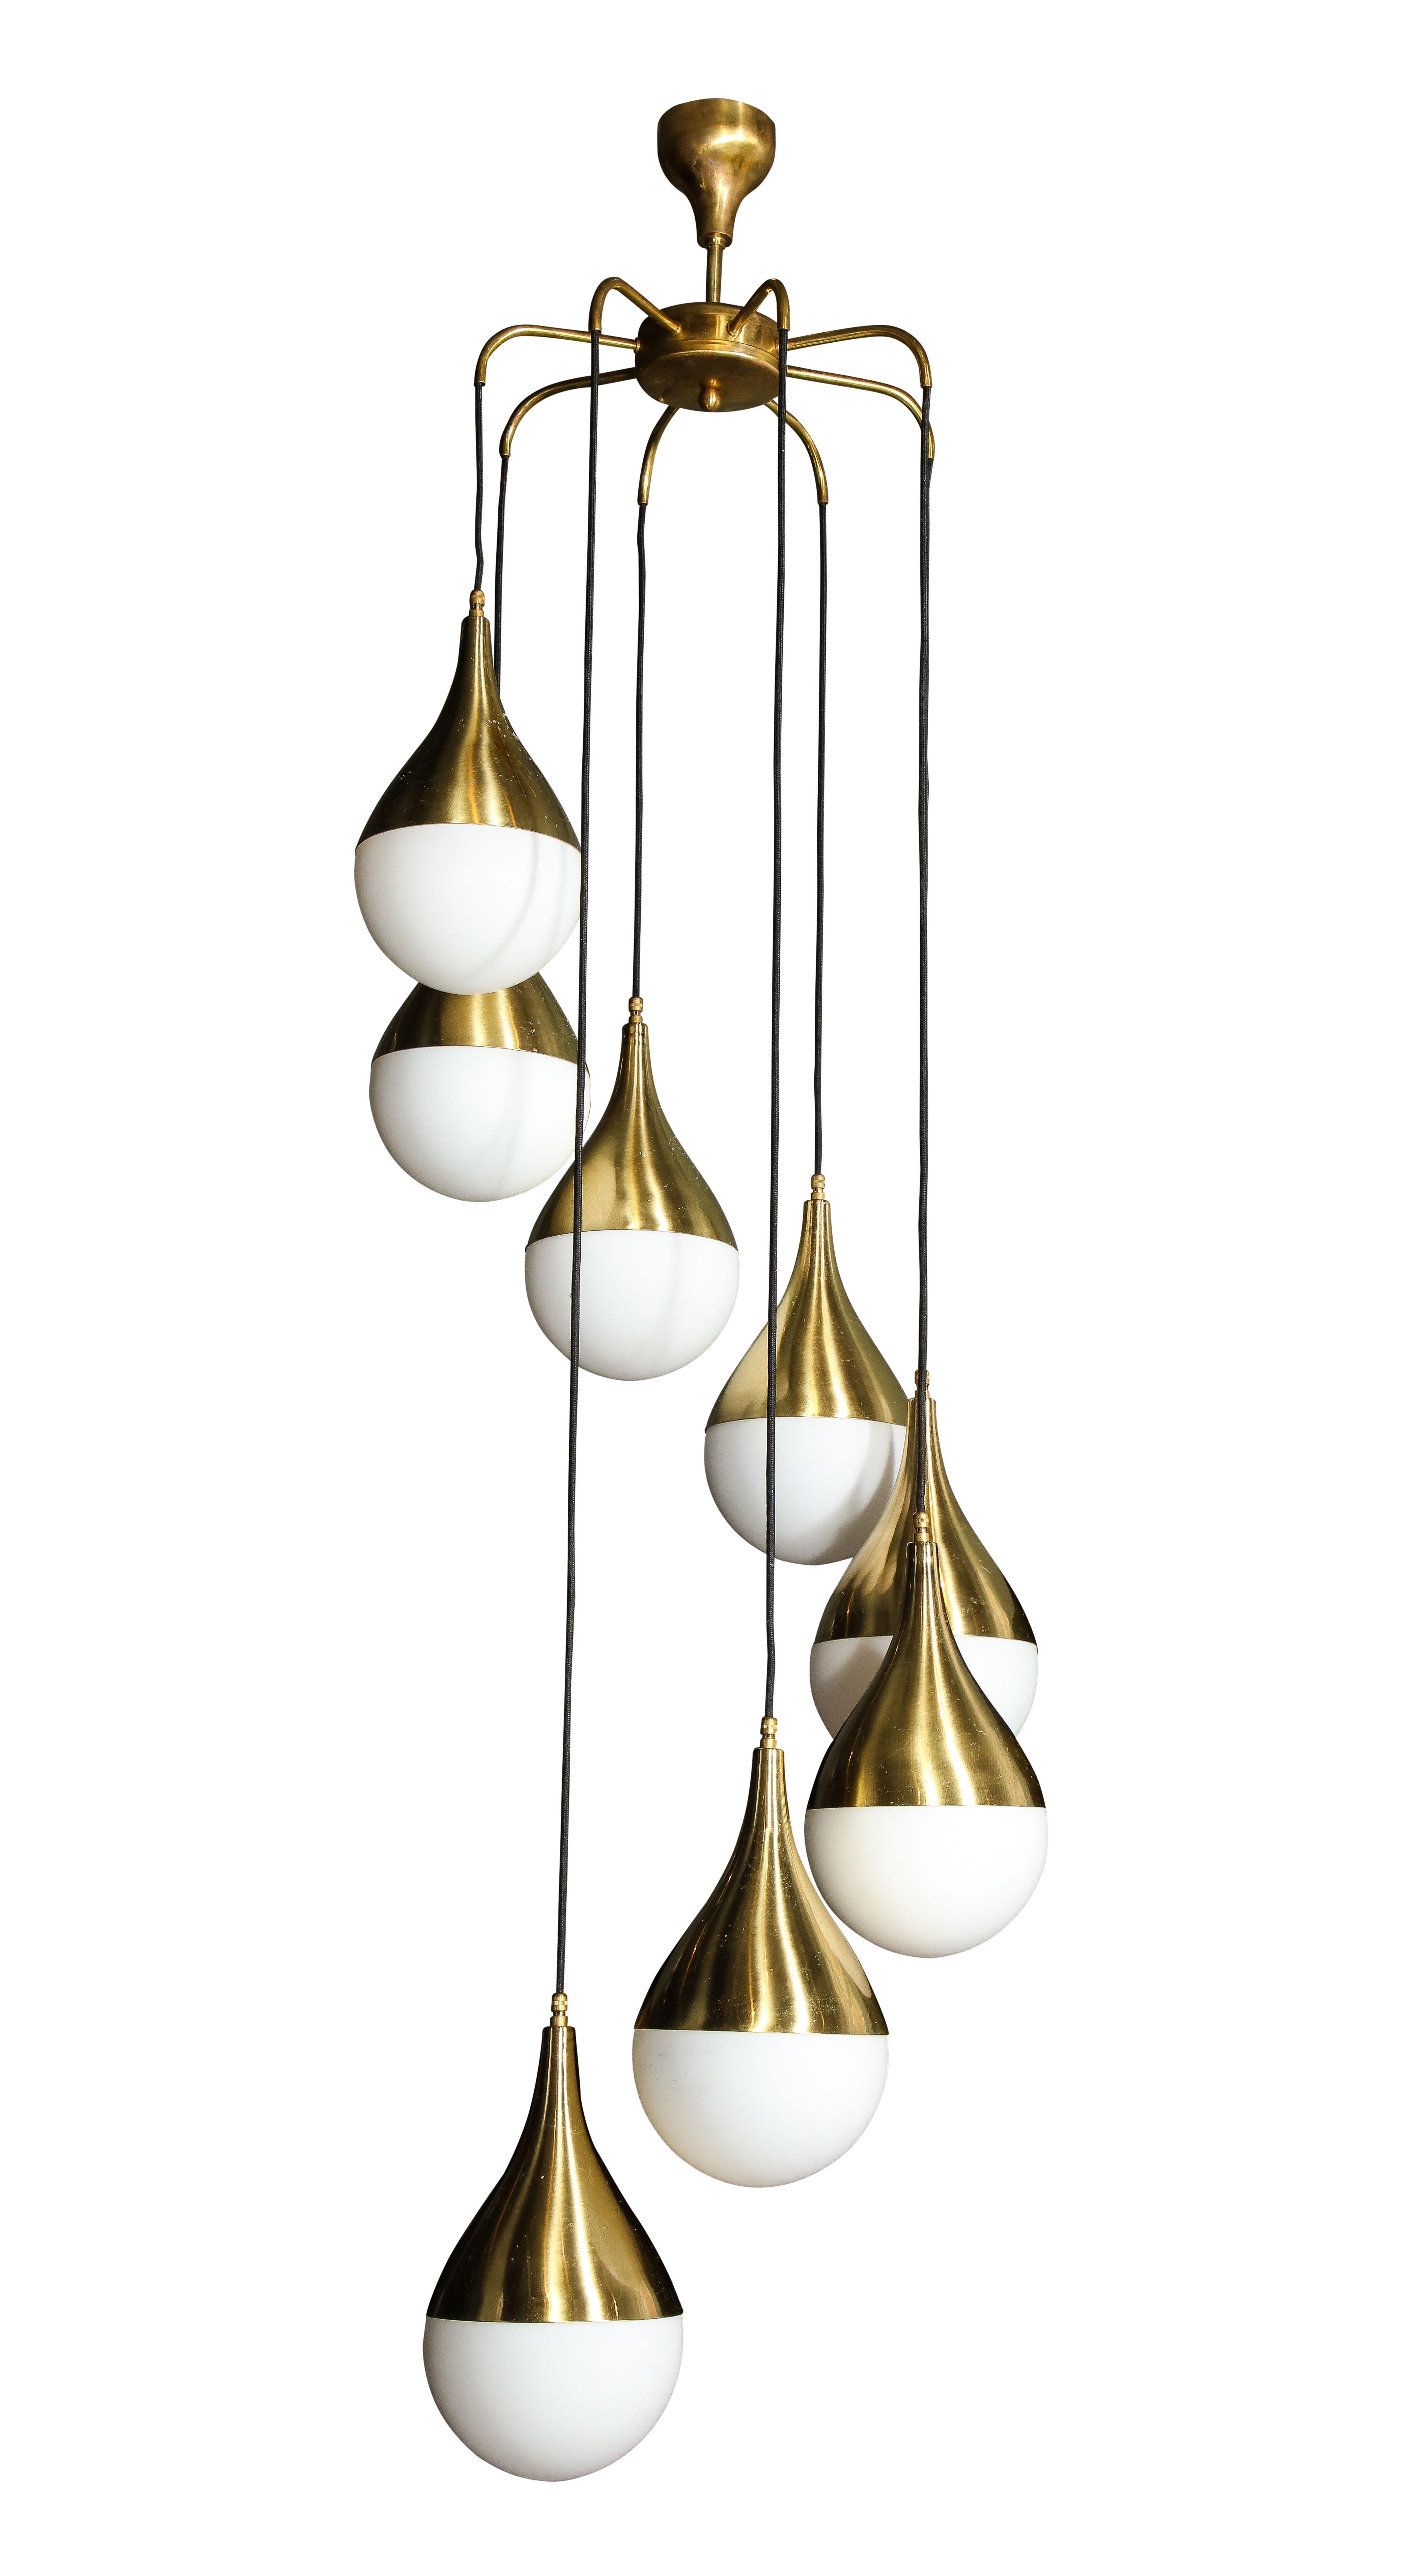 The brass and glass 8-light chandelier suspended from a central brass fixture.
      